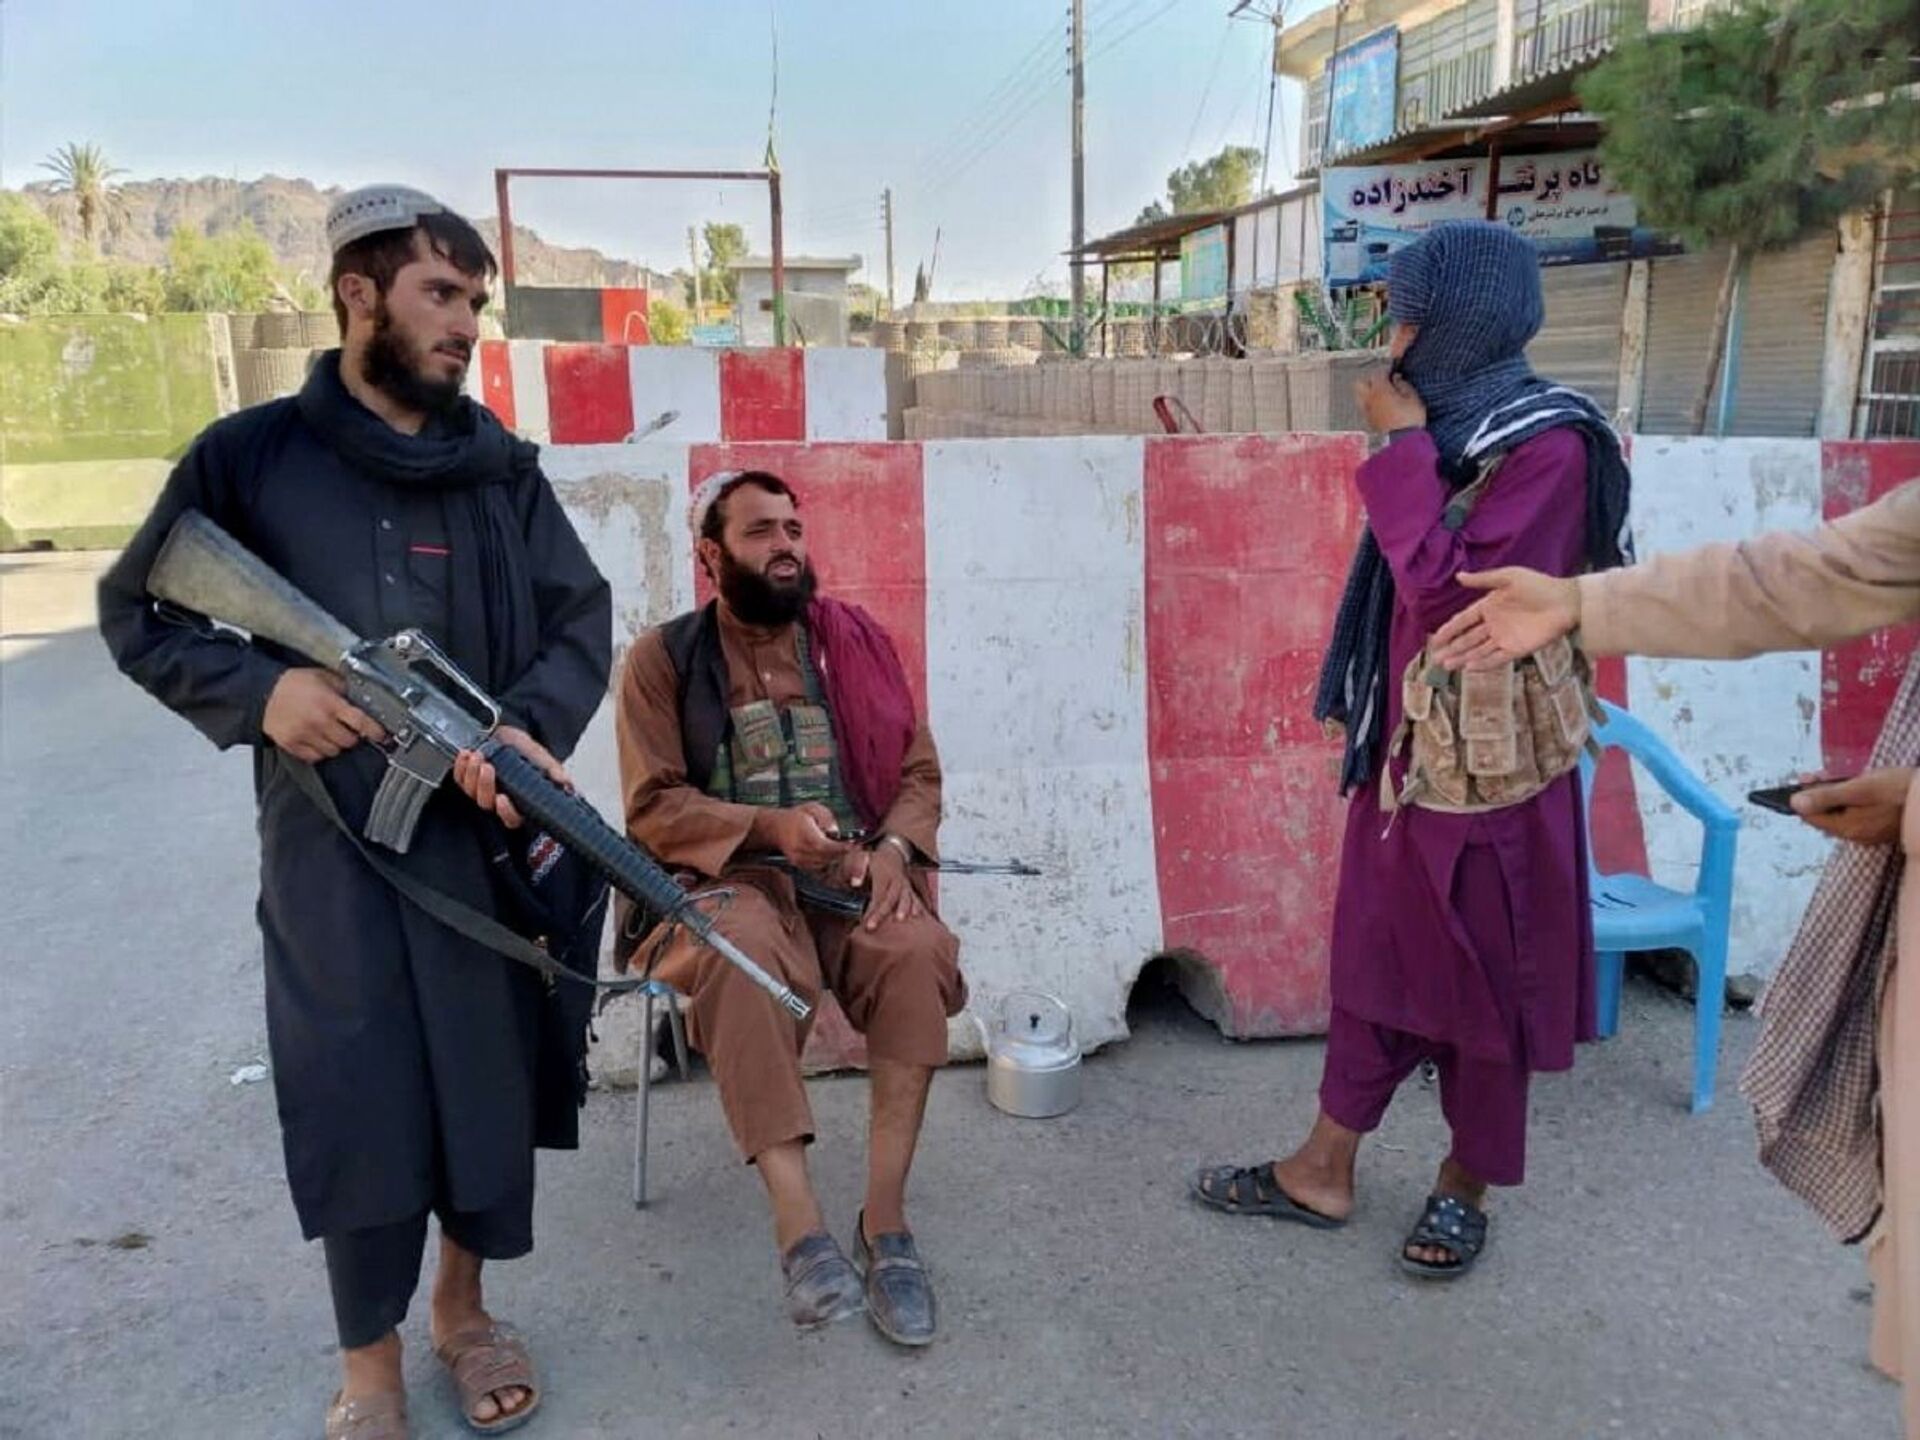 Taliban fighters stand guard at a check point in Farah, Afghanistan August 11, 2021 - Sputnik International, 1920, 07.09.2021